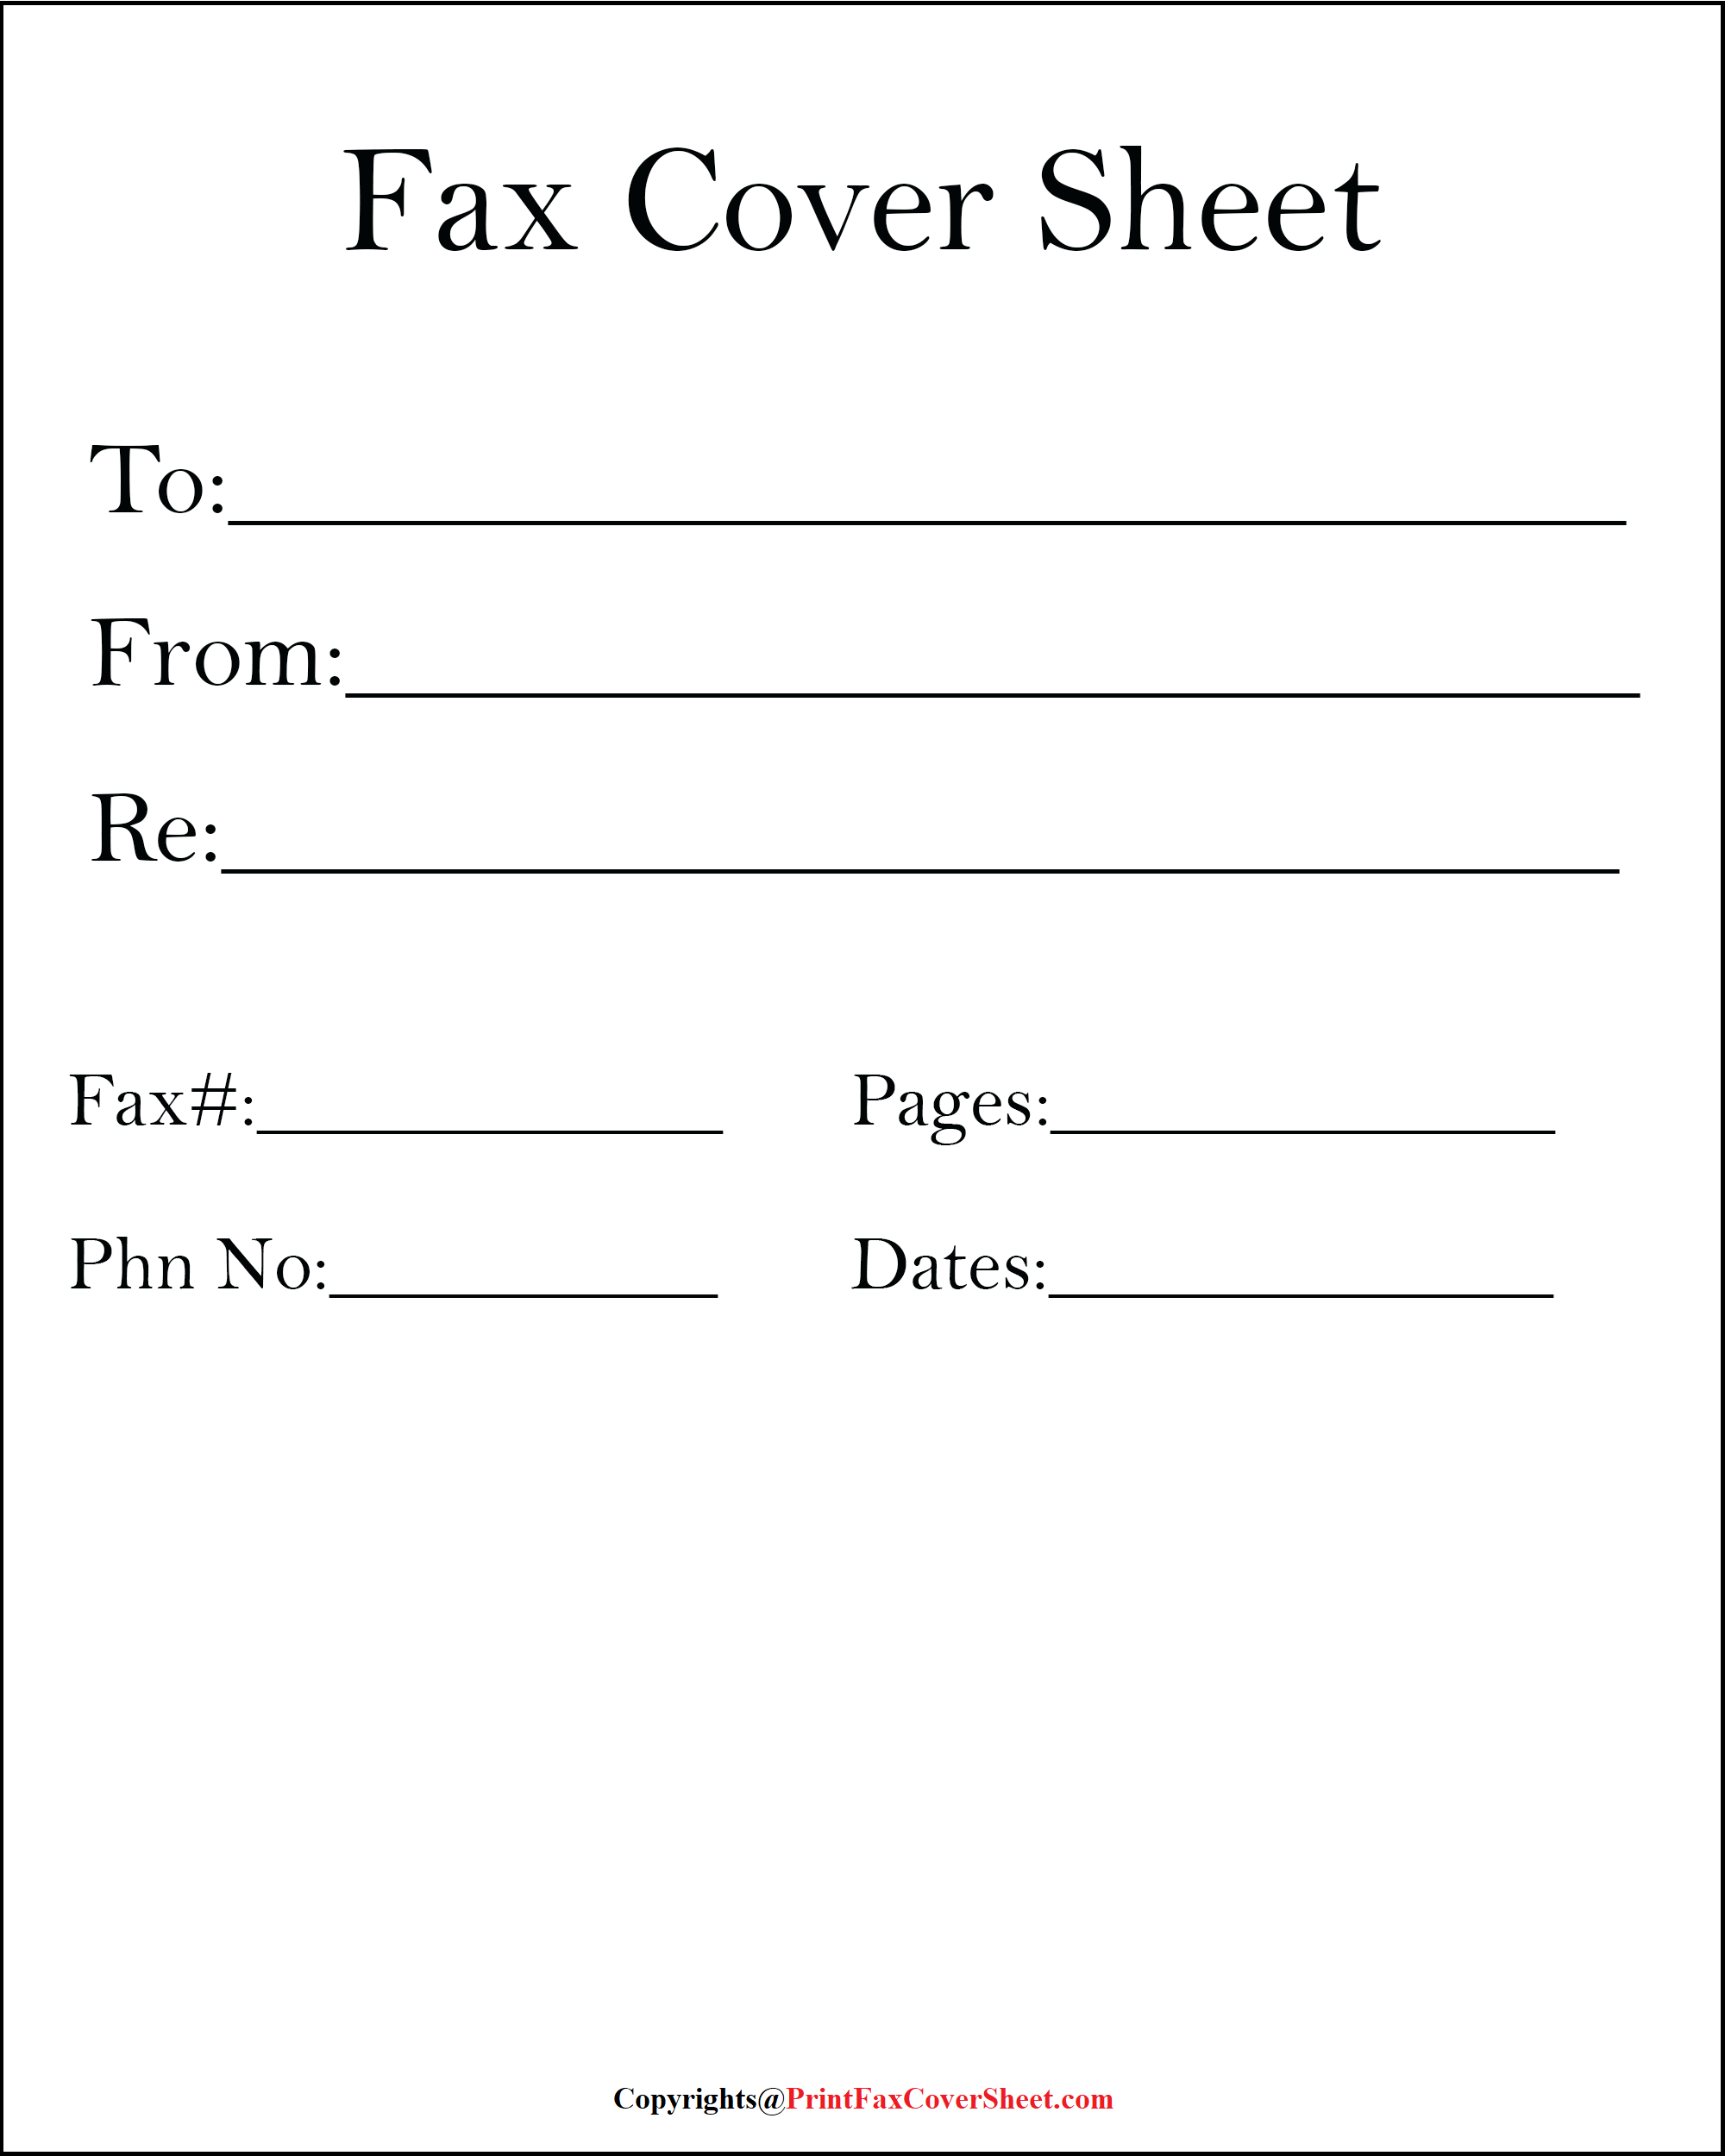 fax cover letter examples